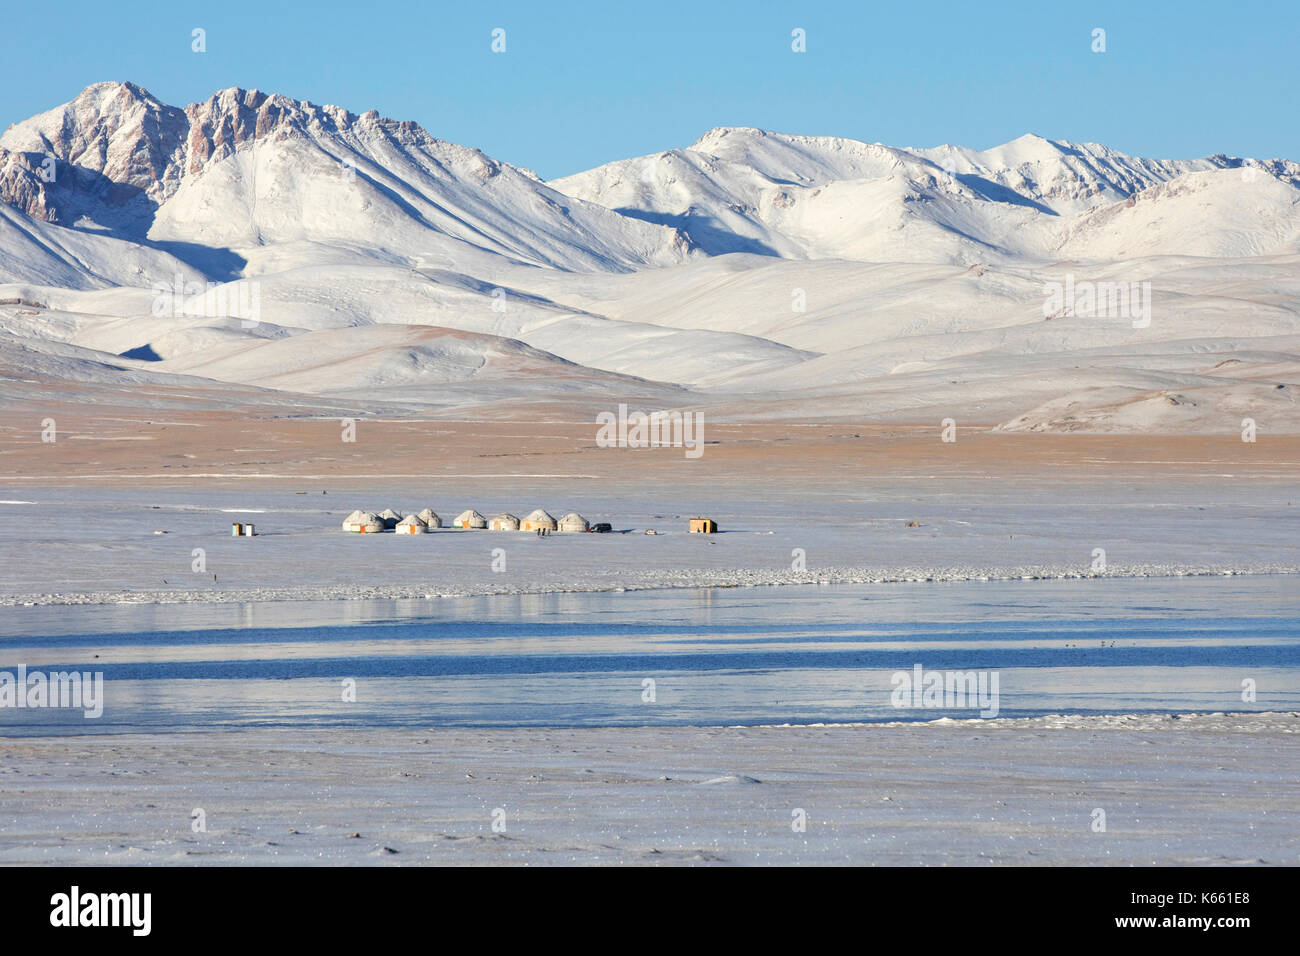 Yurts in traditional Kyrgyz yurt camp in the snow along Song Kul / Song Kol lake in the Tian Shan Mountains, Naryn Province, Kyrgyzstan Stock Photo